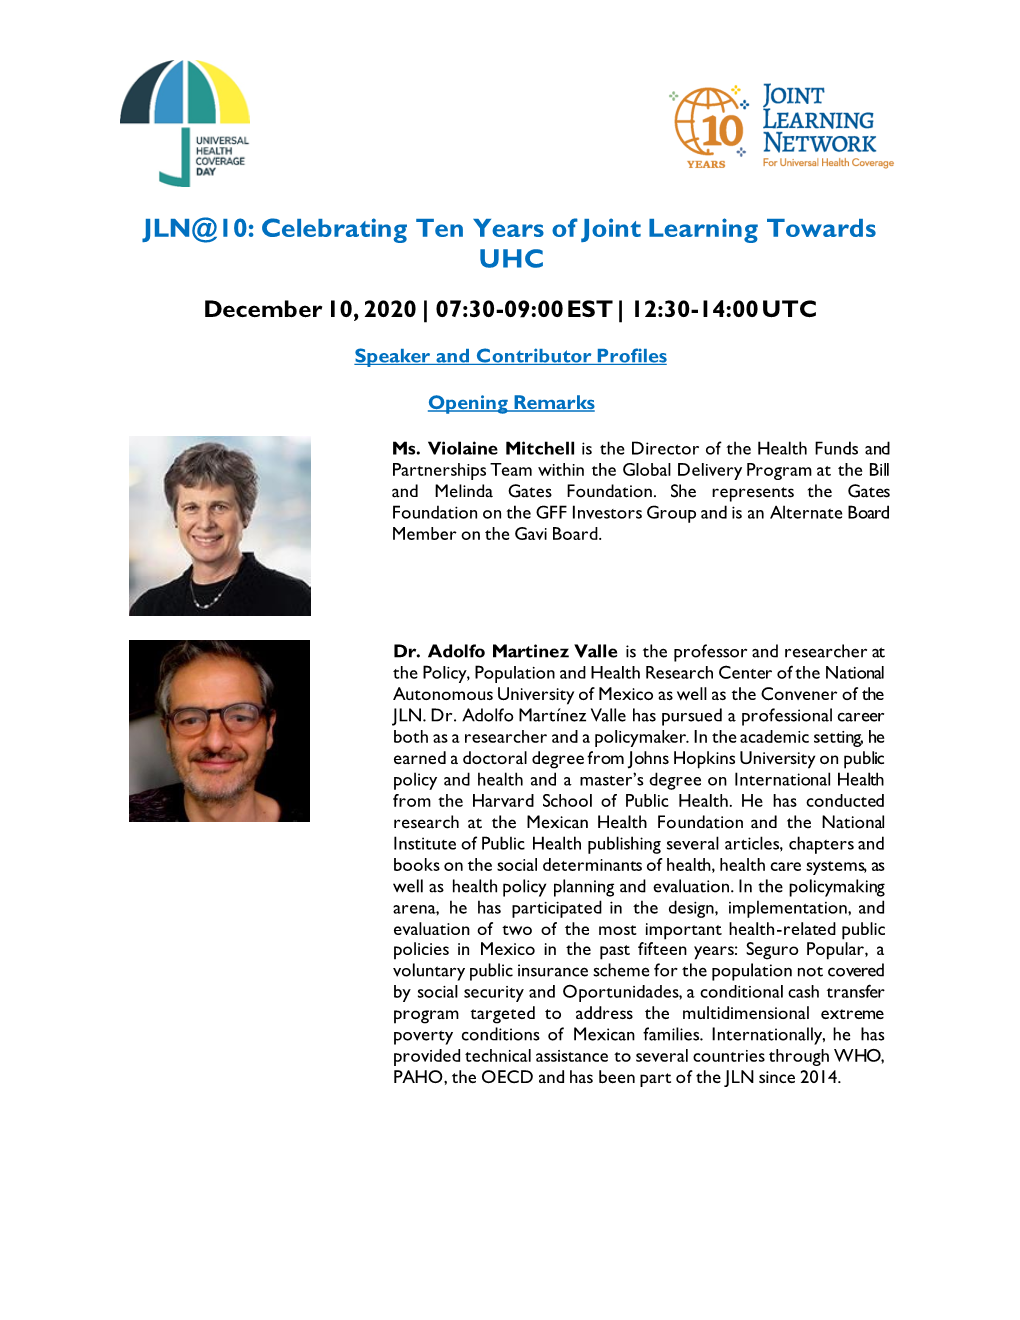 JLN@10: Celebrating Ten Years of Joint Learning Towards UHC